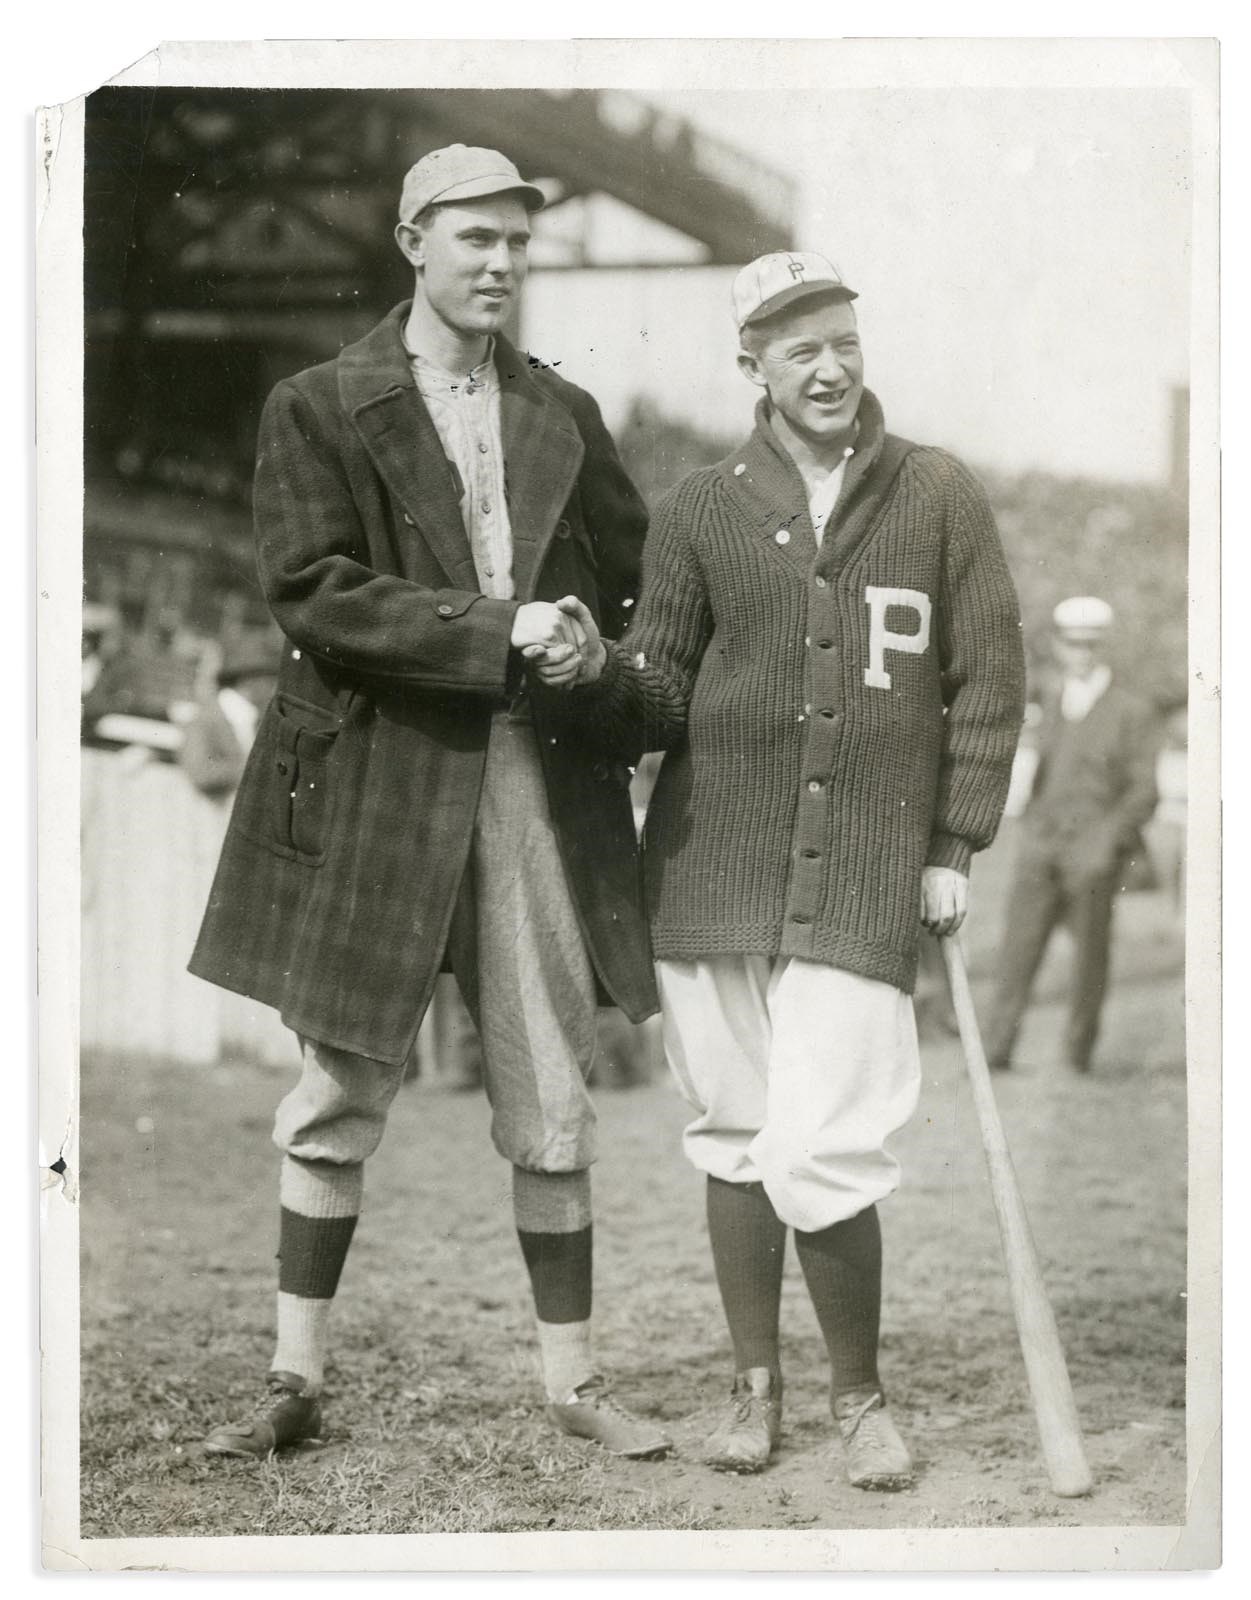 Vintage Sports Photographs - Circa 1910-19 Grover Cleveland Alexander and Eddie Shore, by Paul Thompson